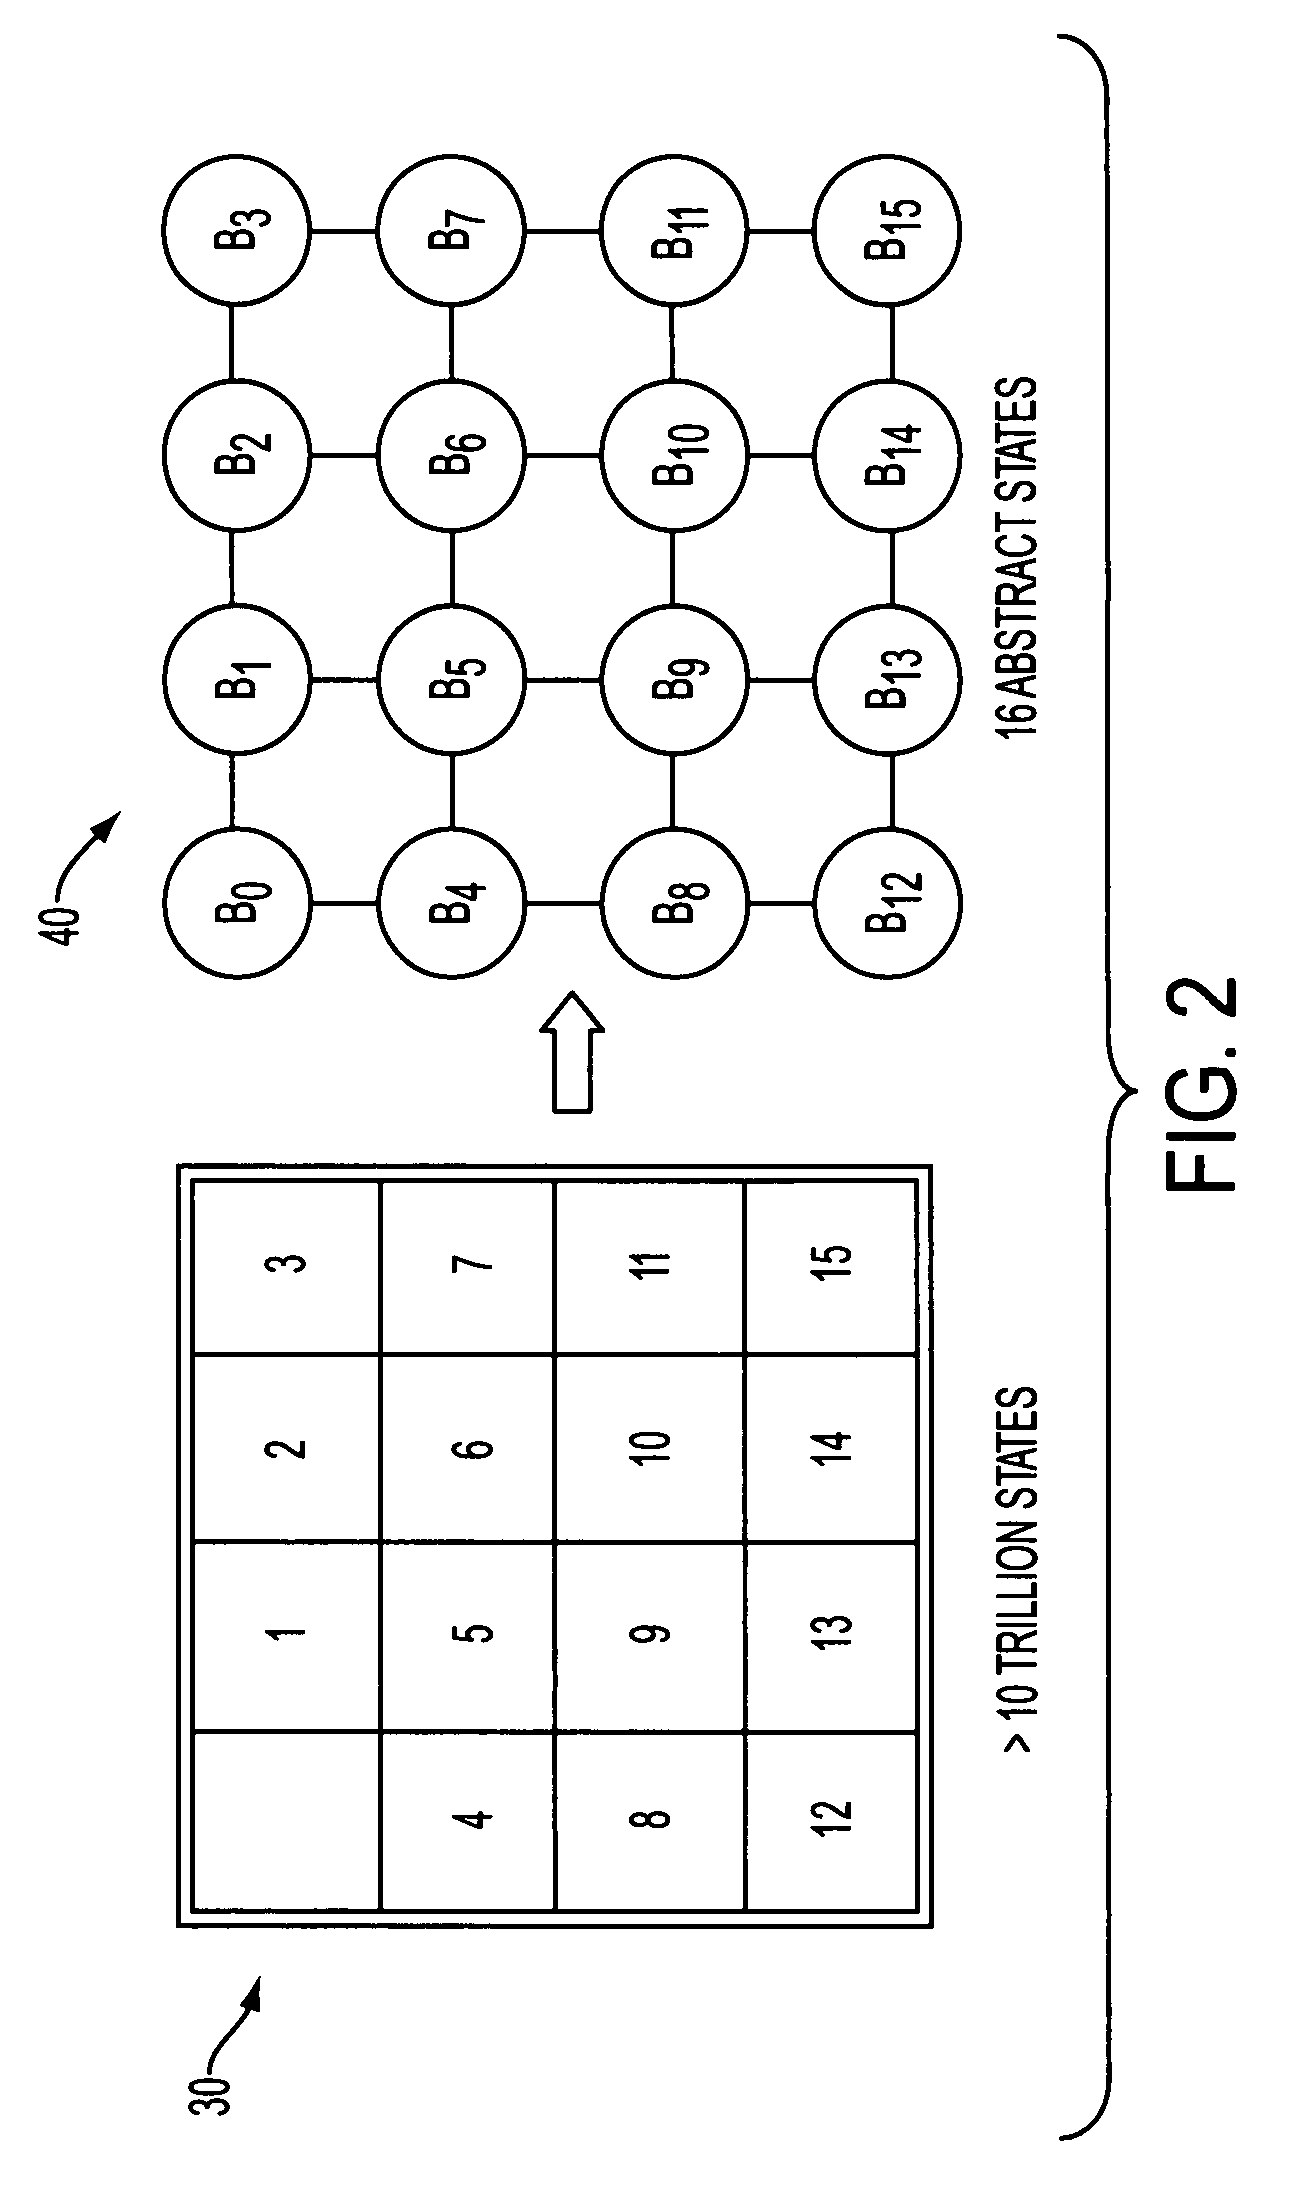 System and method for parallel graph search utilizing parallel structured duplicate detection